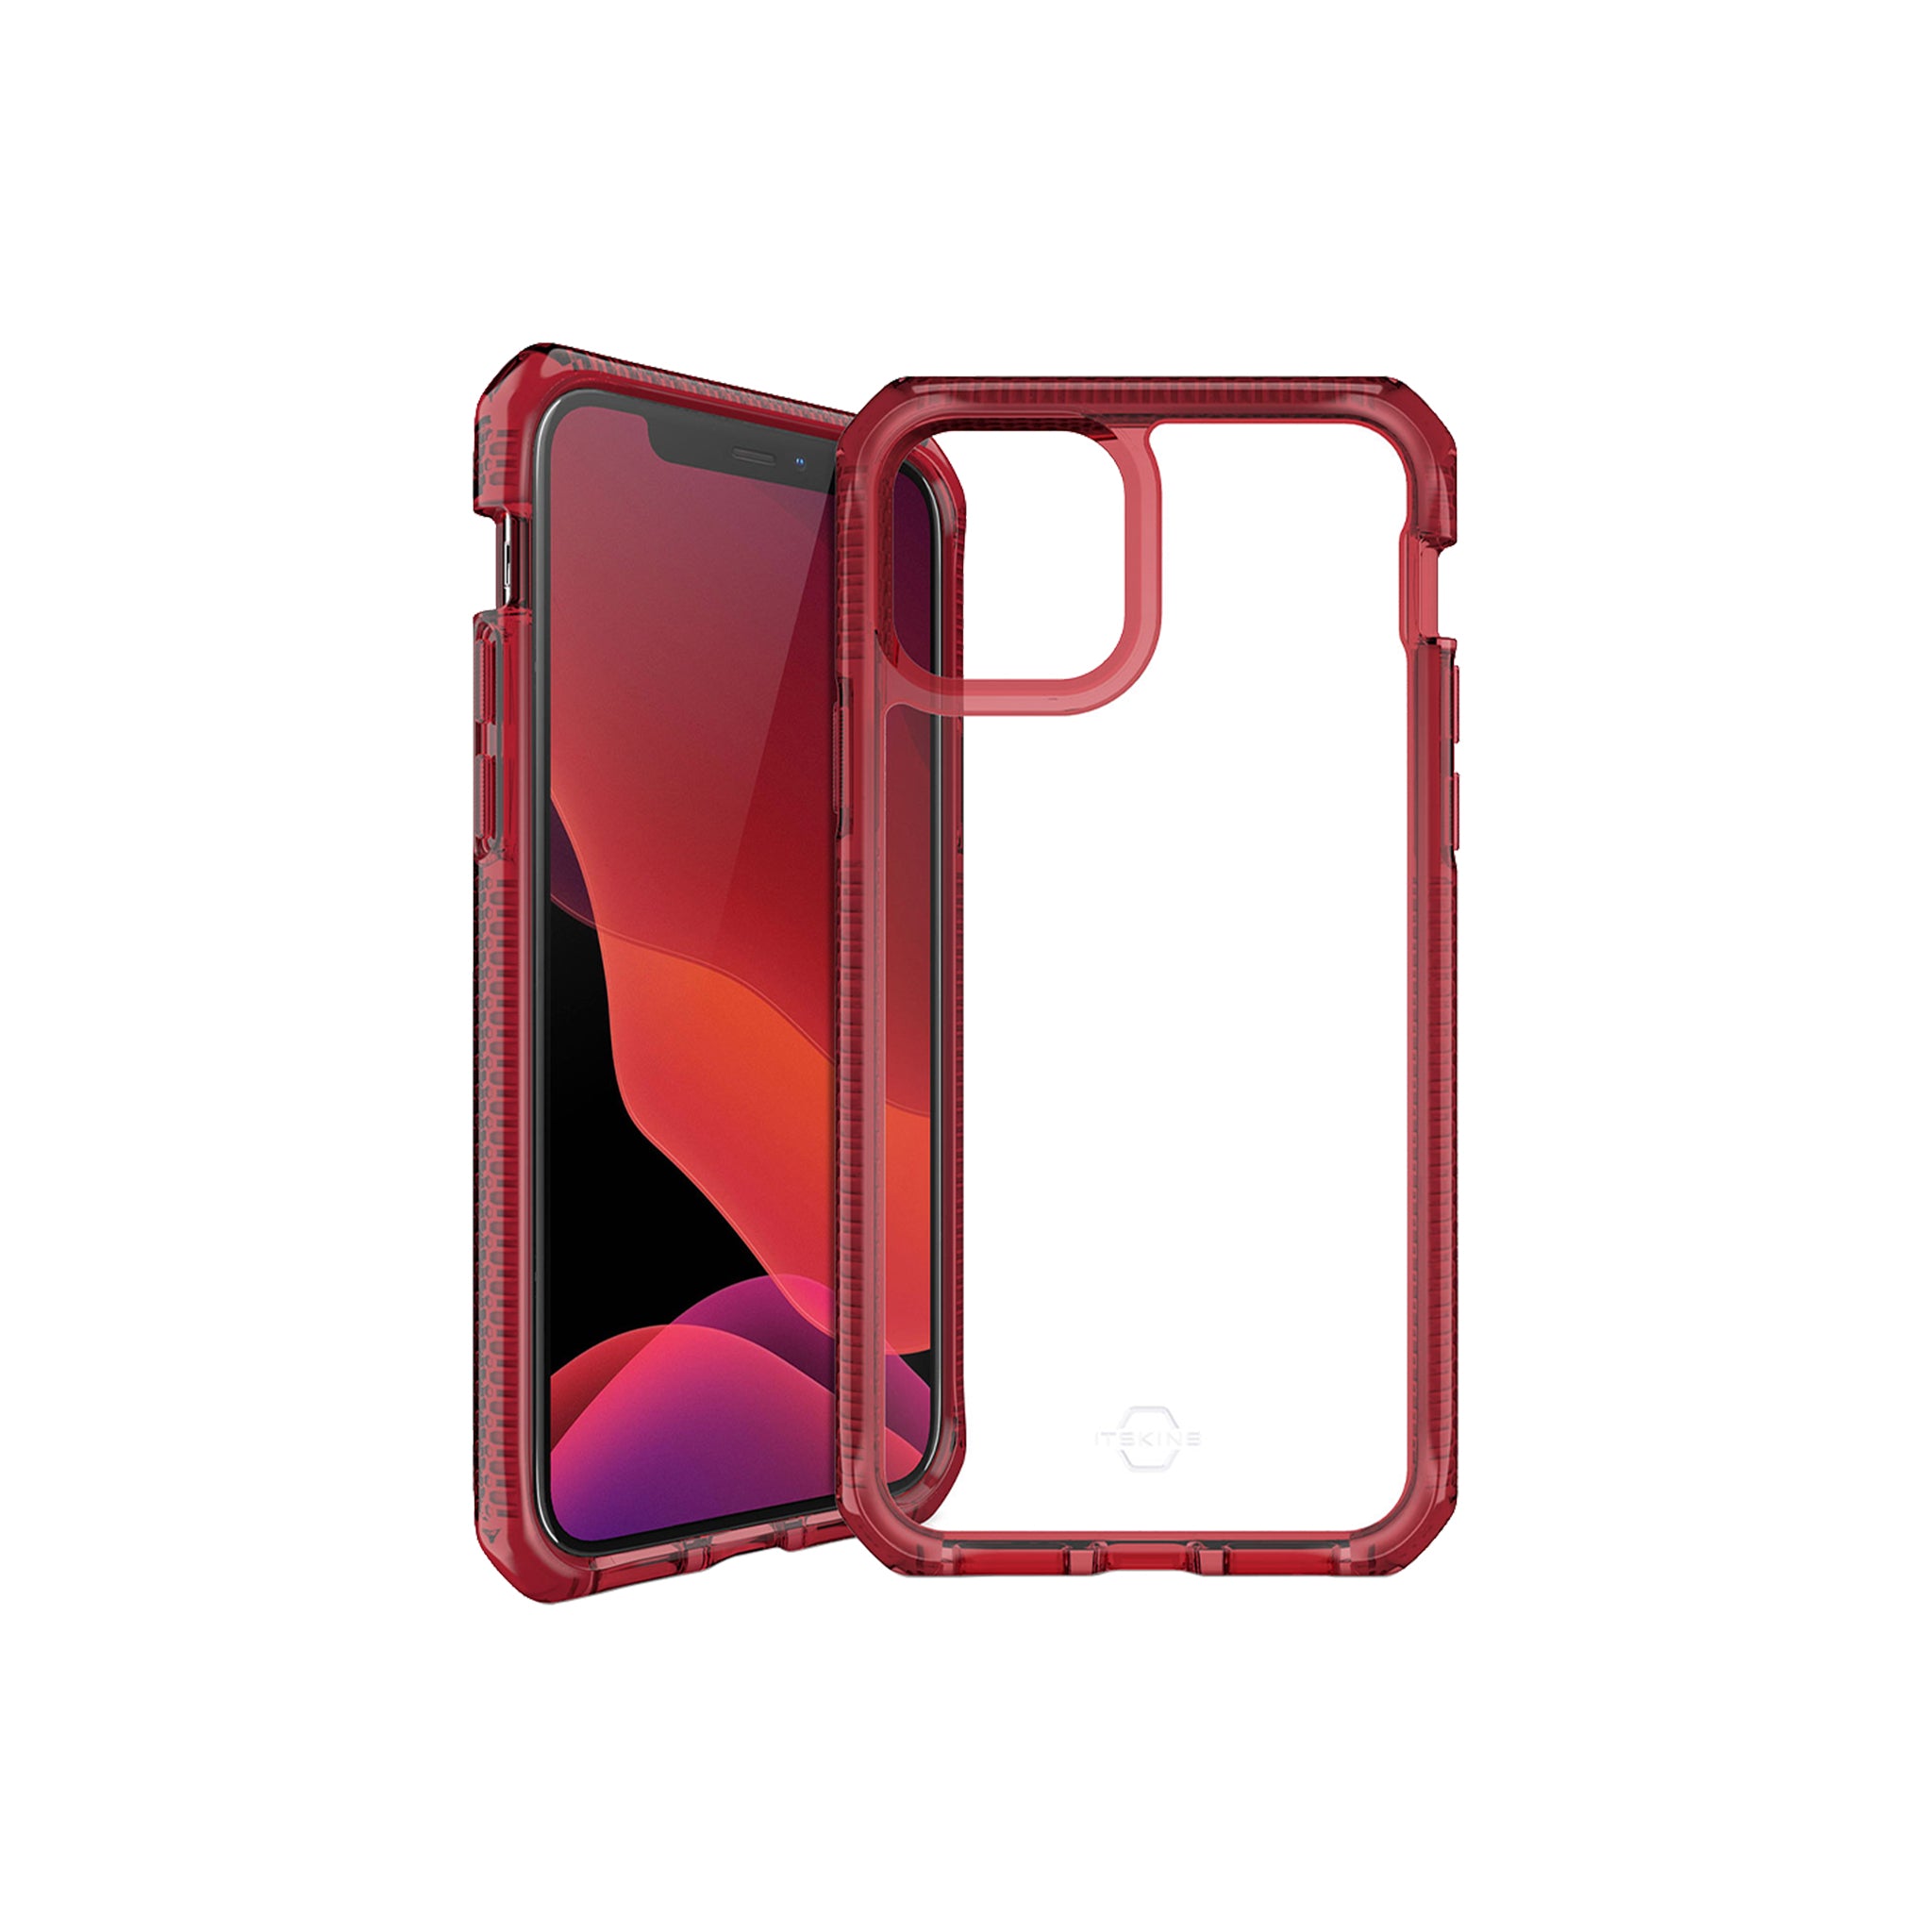 Itskins - Supreme Clear Case For Apple Iphone 12 Mini - Red And Transparent